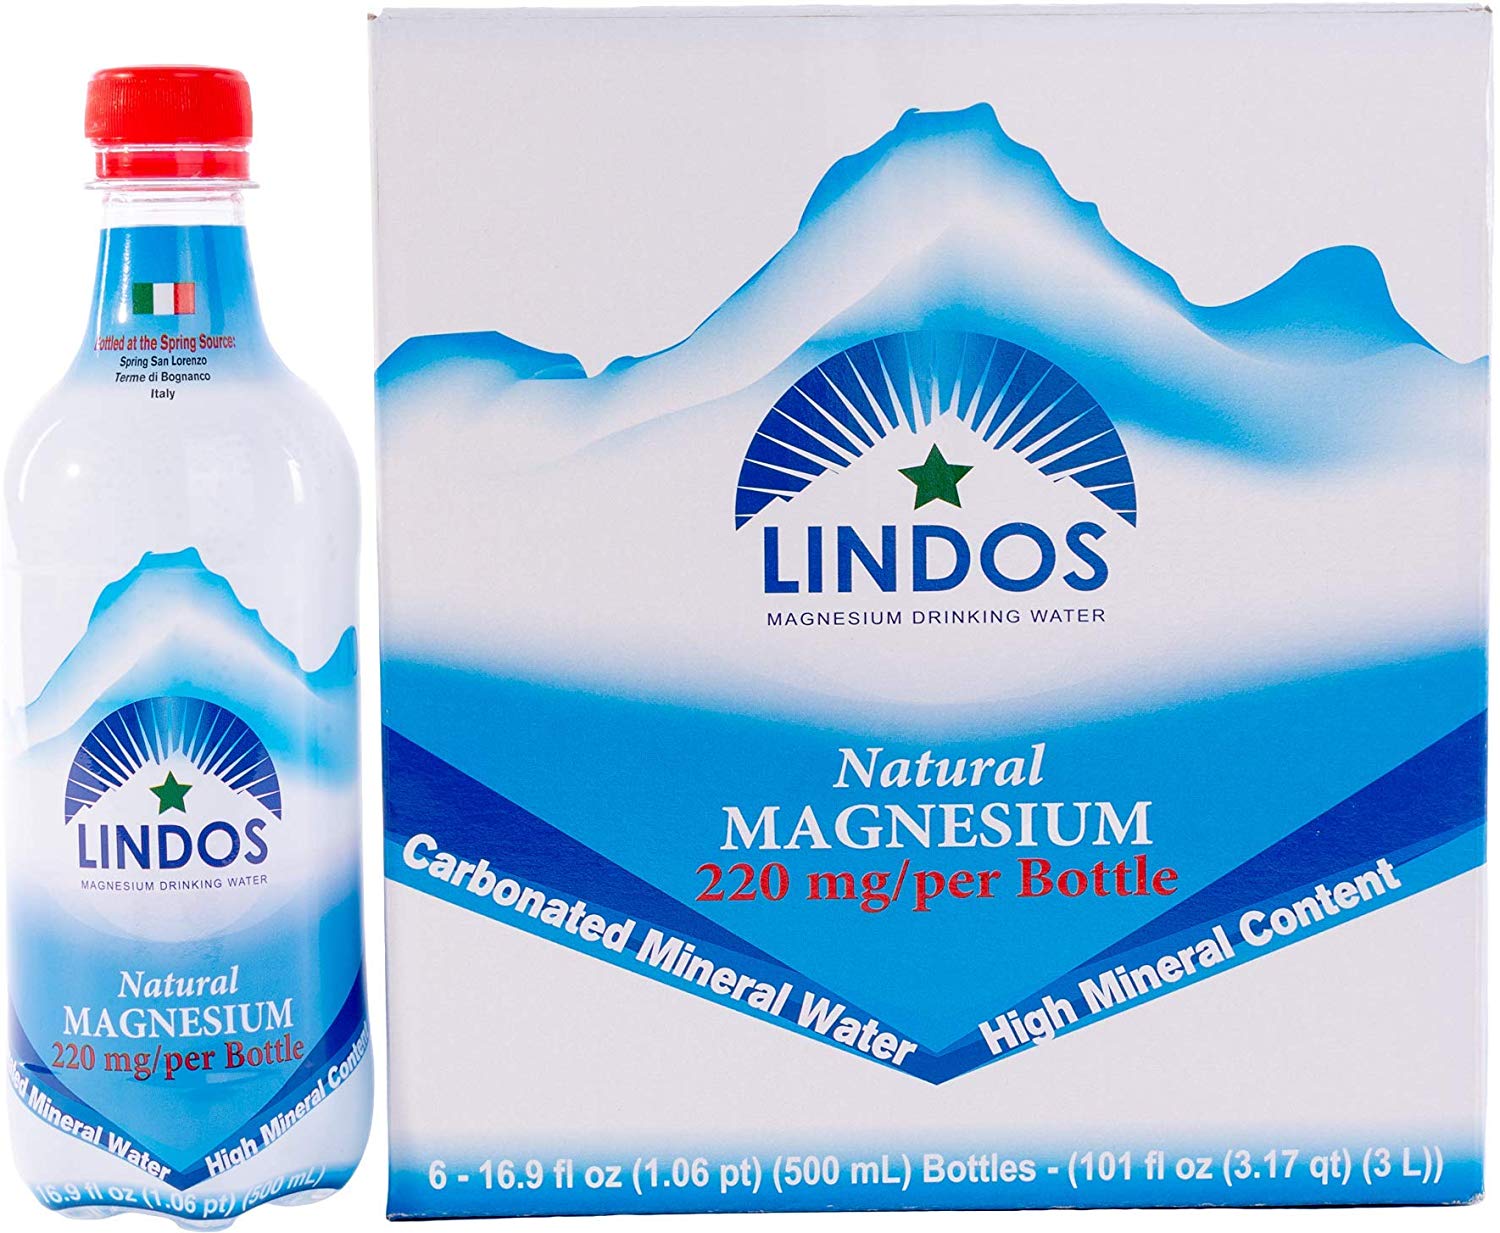 Lindos Magnesium, located in the Alps Mountains of Italy, announced plans this week to expand its retail distribution network in the United States for its 100 percent Natural Magnesium.
Lindos imports a naturally effervescent Magnesium directly from an Italian Magnesium spring – “Pure Natural Magnesium Directly from the Earth.”